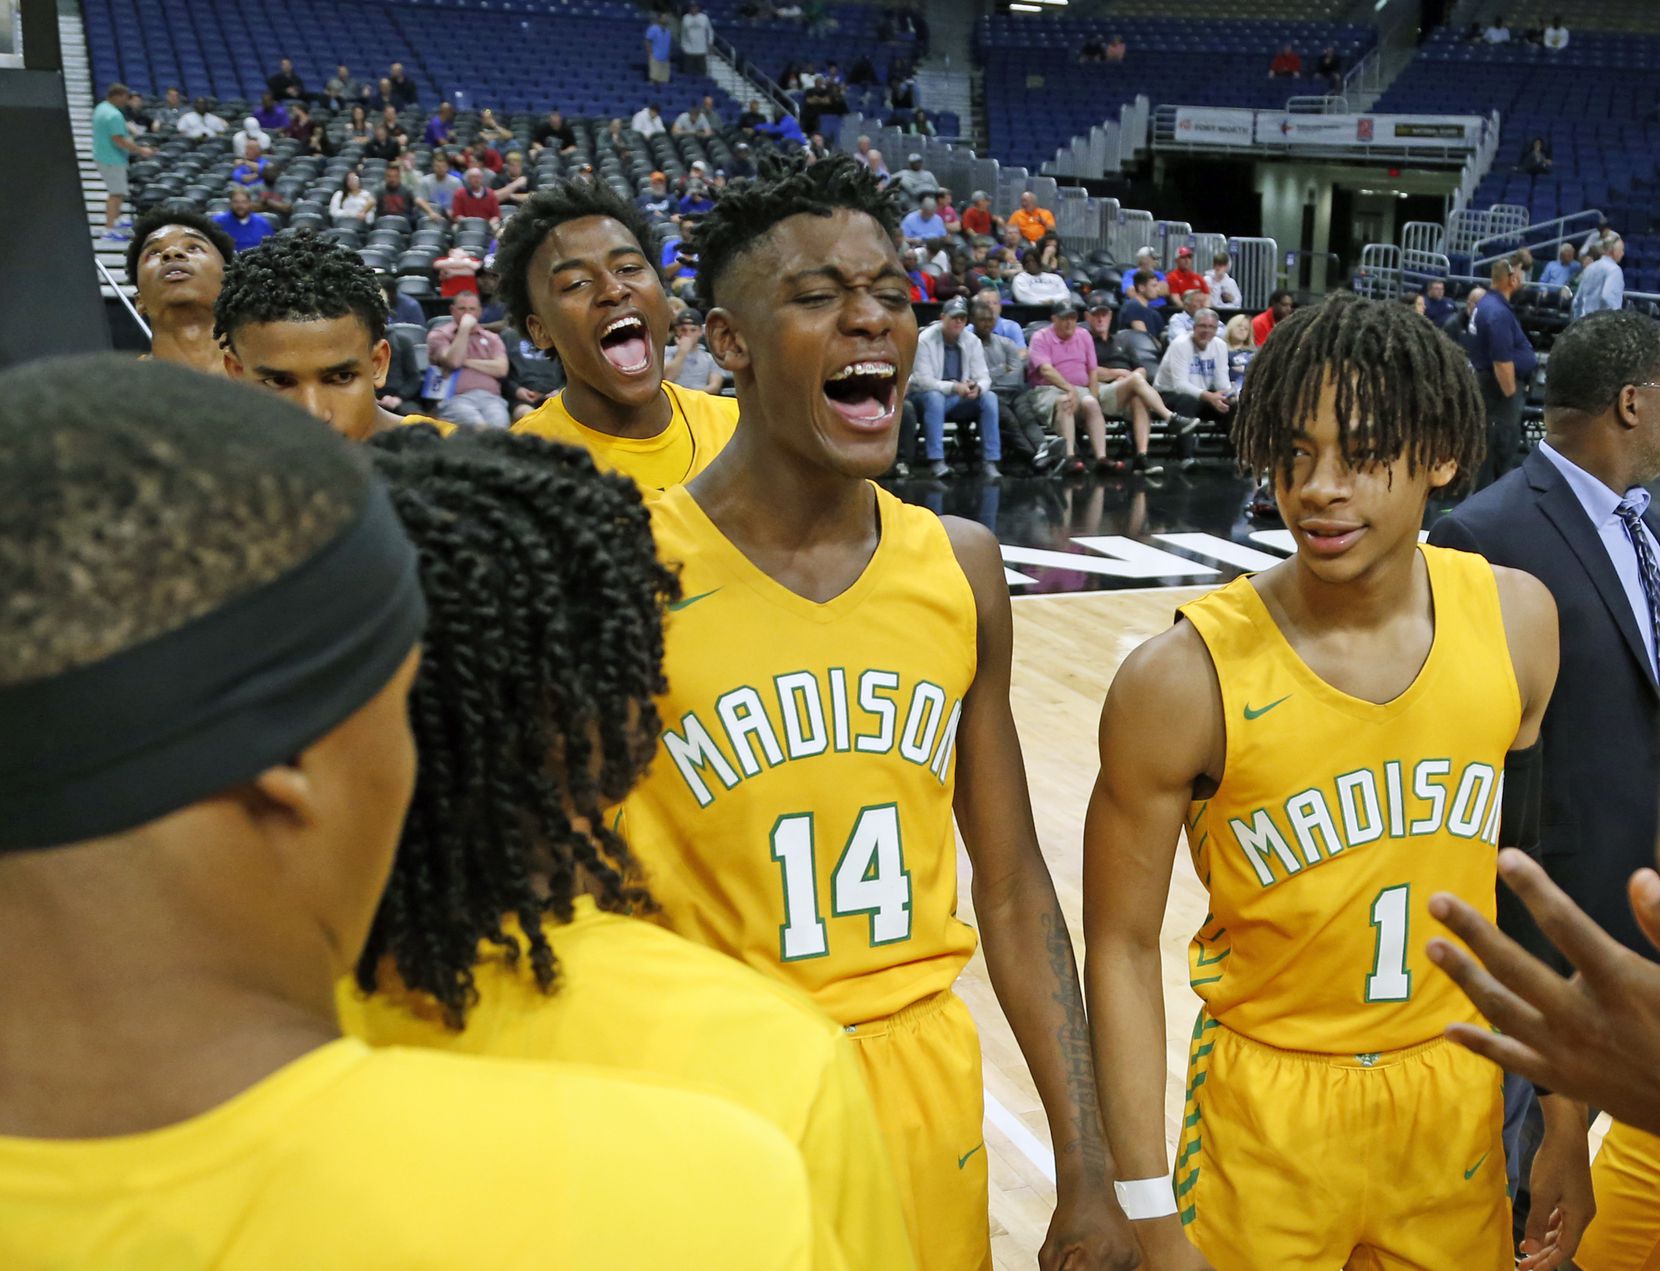 Madison center Leonard Miles IV #14 celebrates with the rest of his team. Madison defeated...